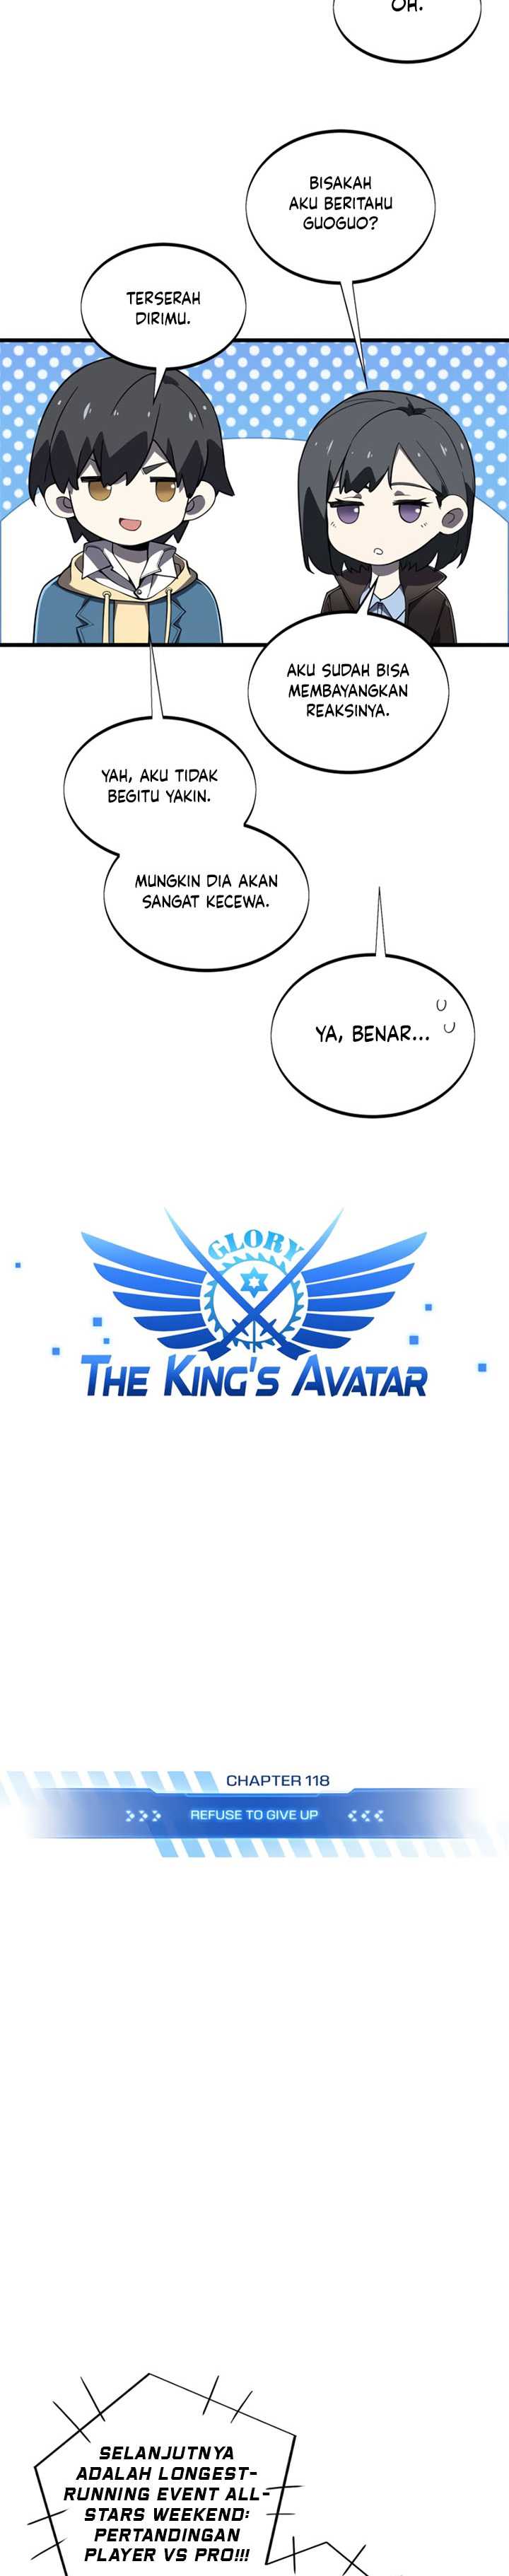 The King’s Avatar Chapter 118